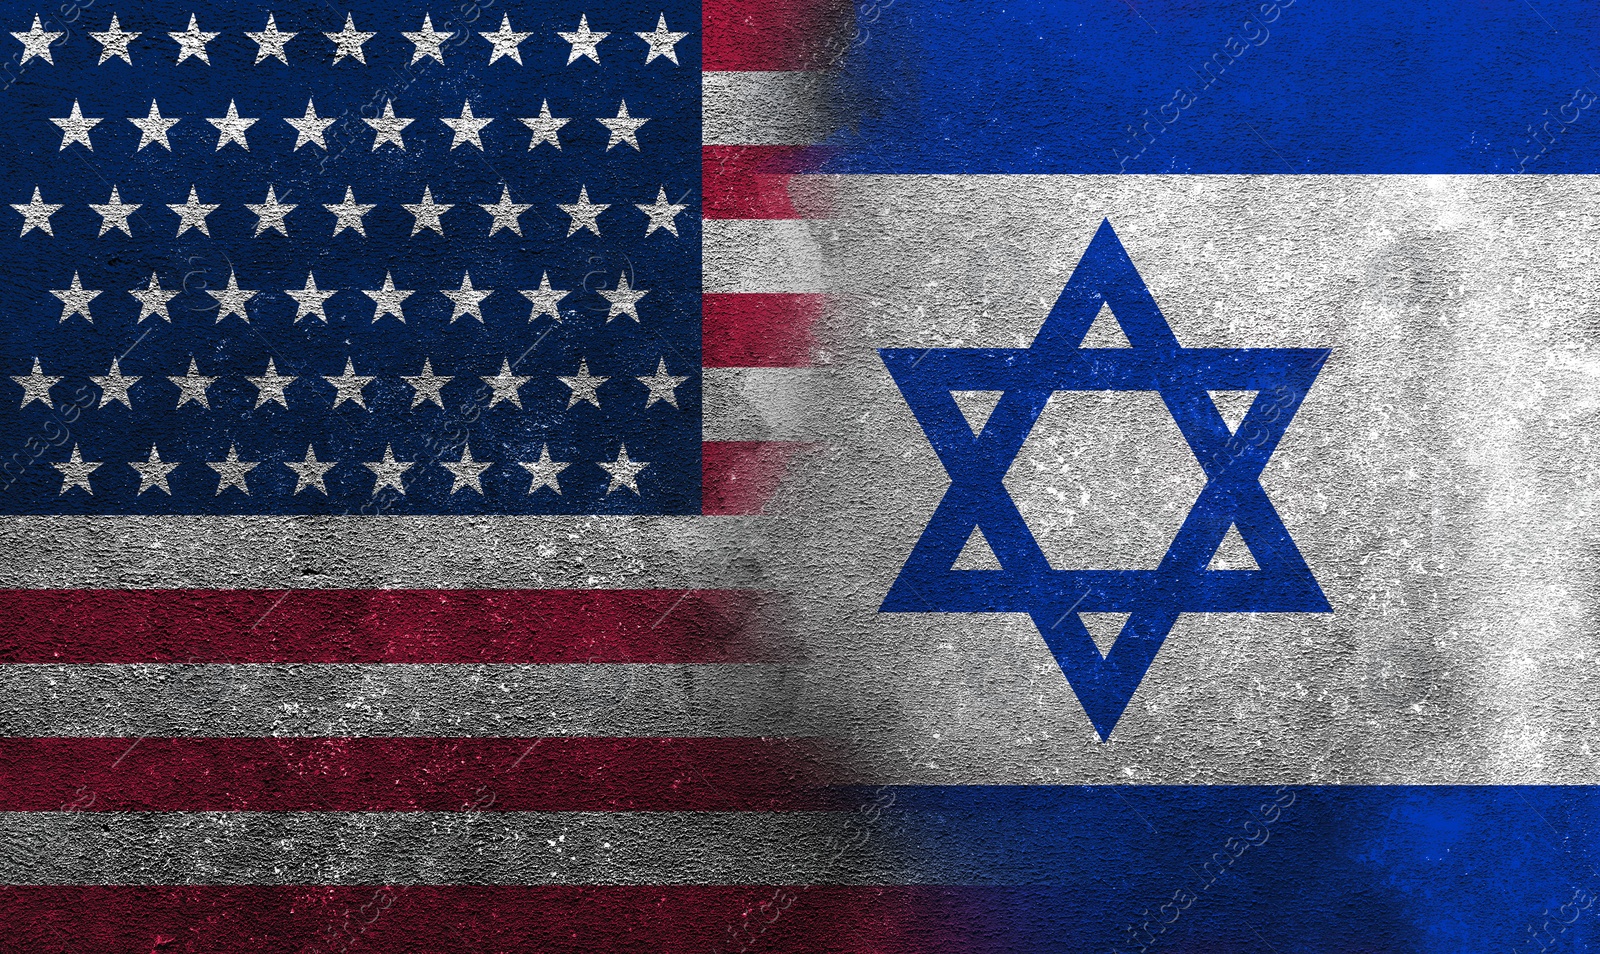 Image of International relations. National flags of Israel and USA on textured surface, banner design